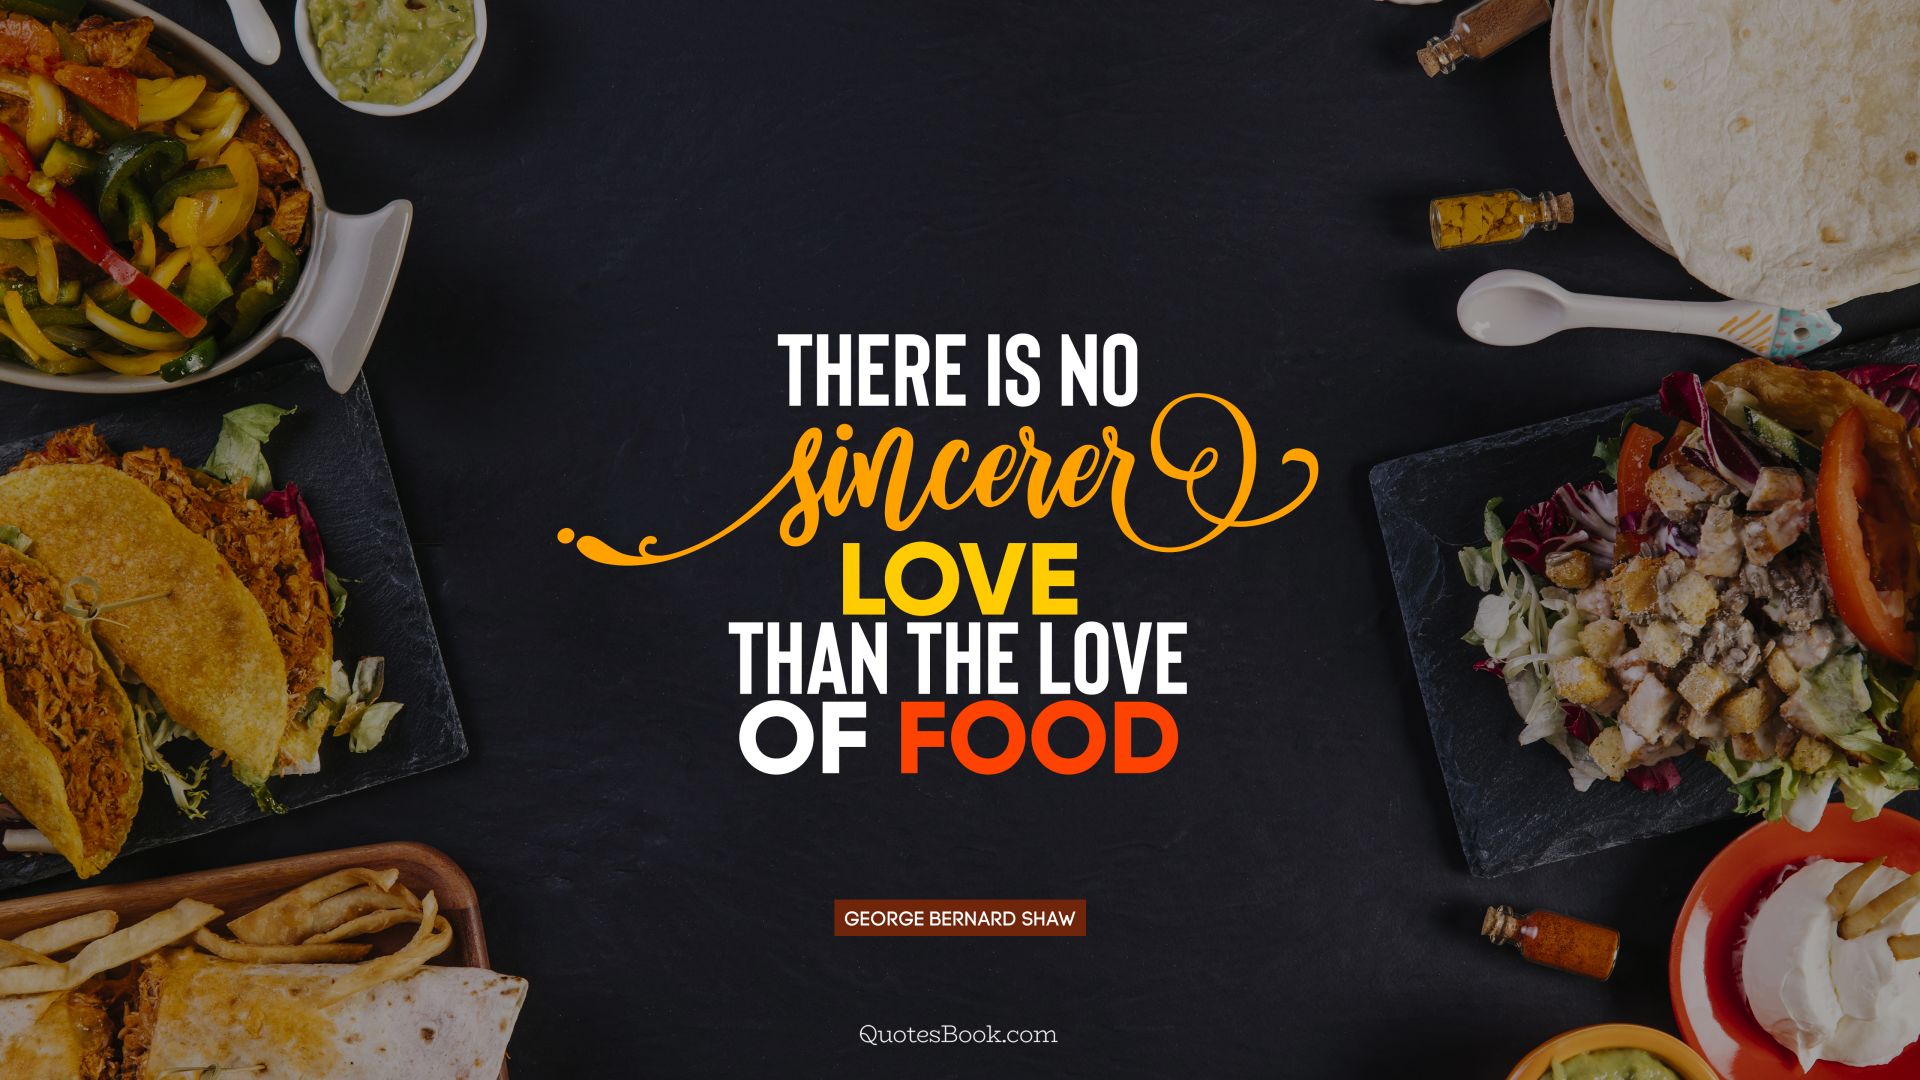 There is no sincerer love than the love of food. - Quote by George Bernard Shaw